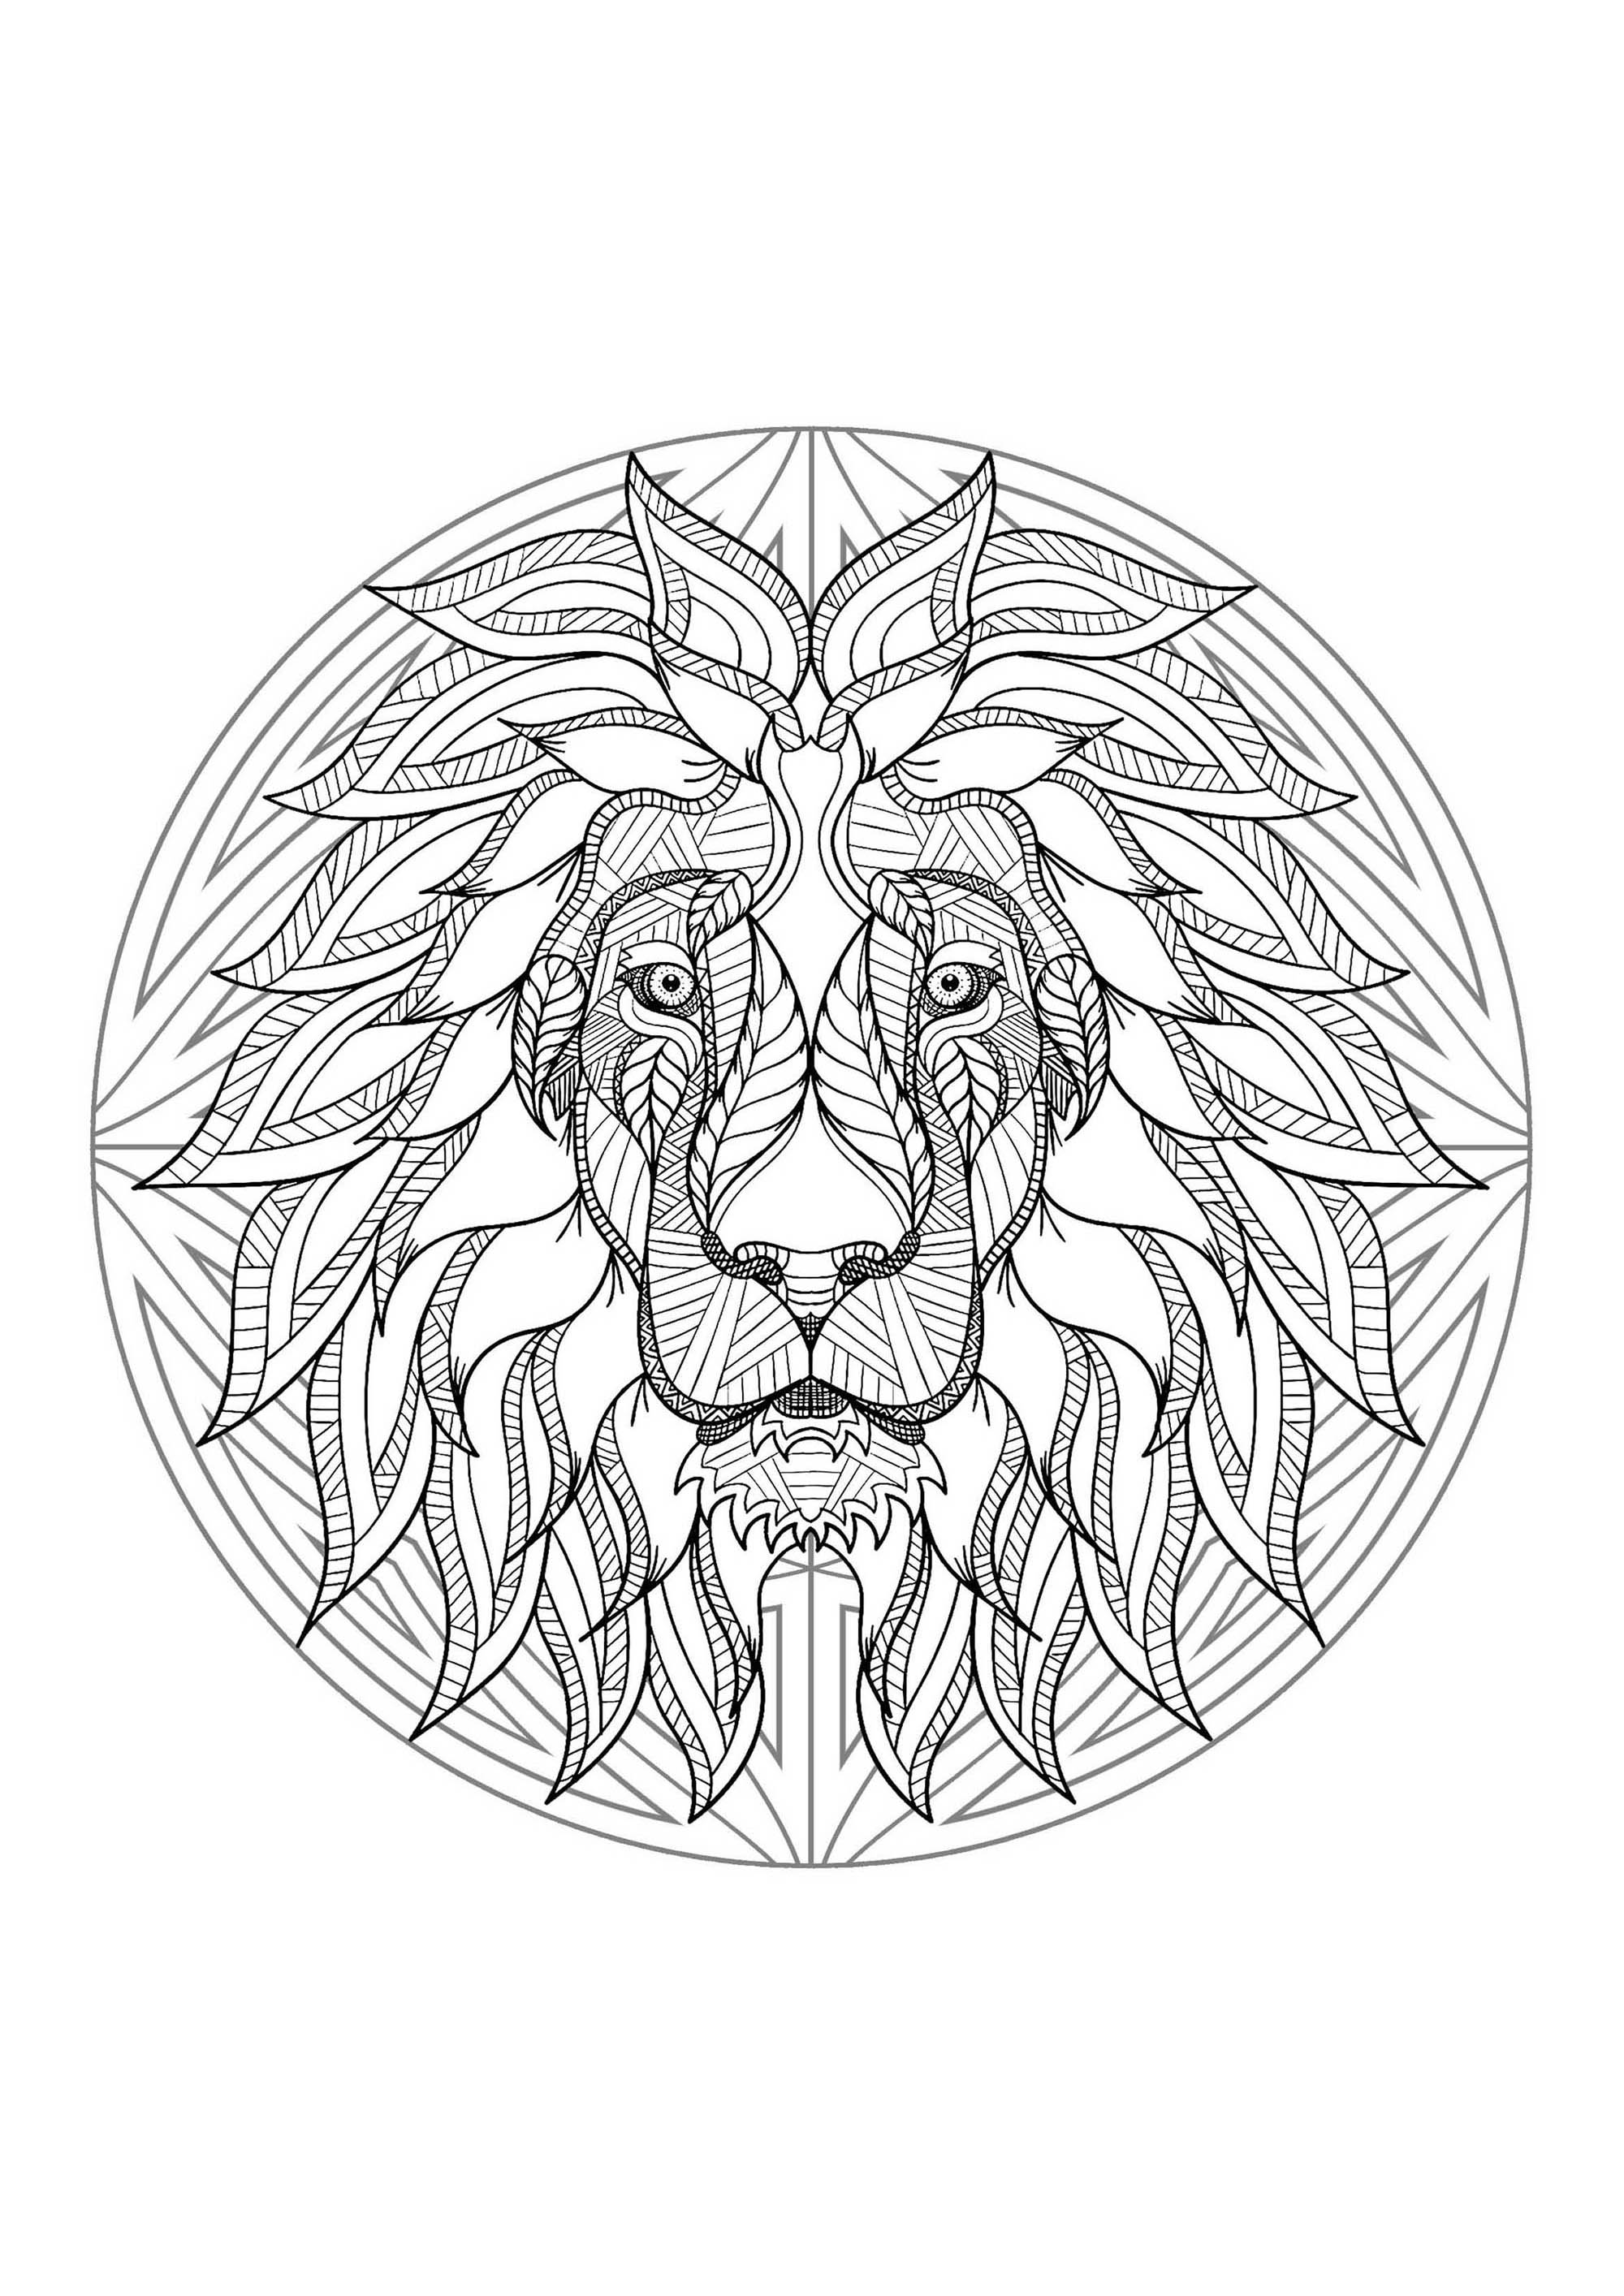 A beautiful Mandala coloring page, of great quality and originality. It's up to you to choose the most appropriate colors to color this lion. You must clear your mind and allow yourself to forget all your worries and responsibilities.